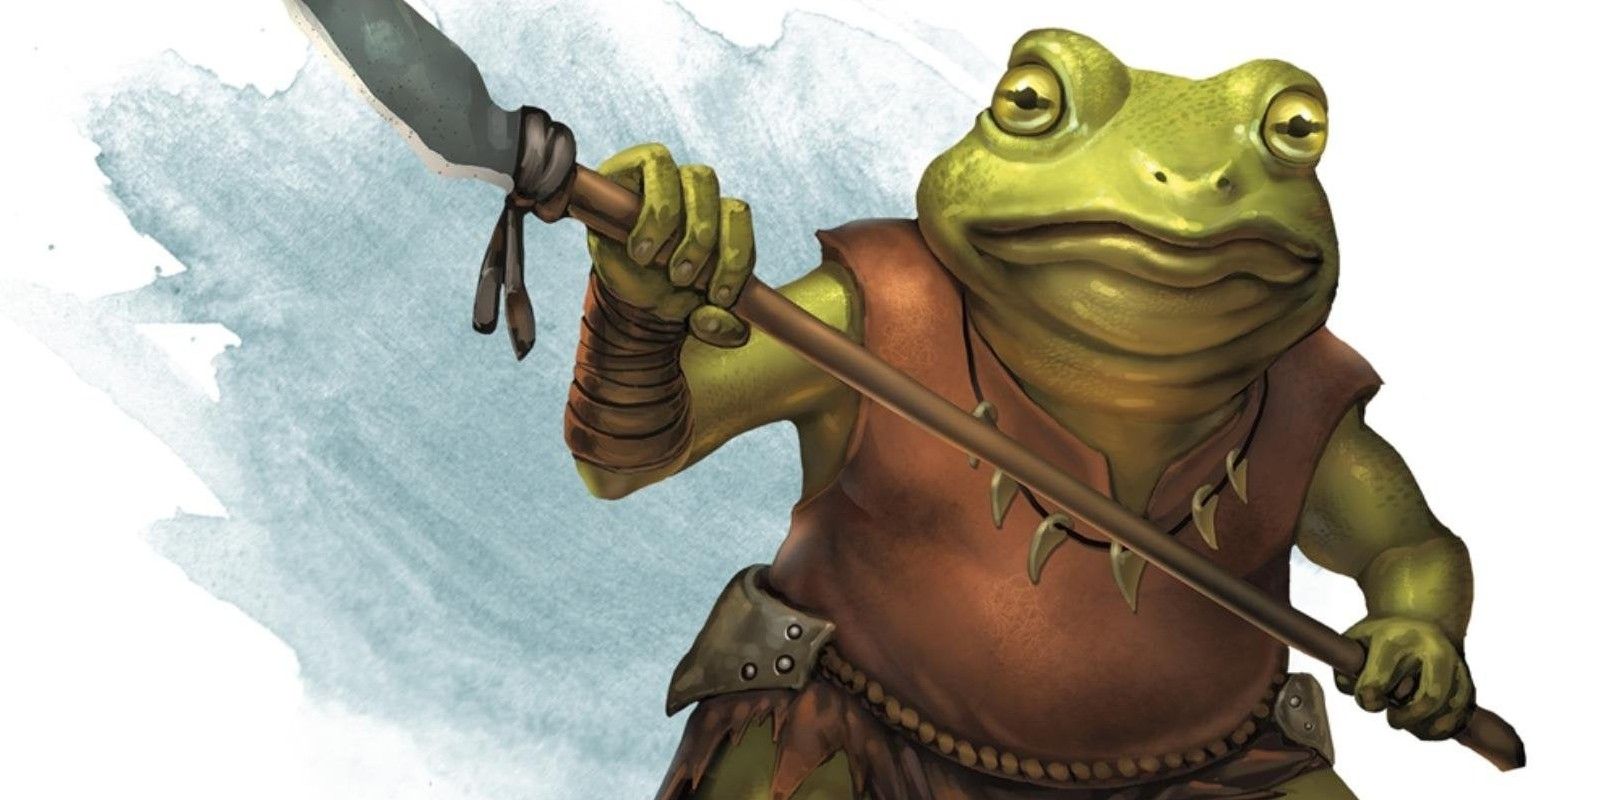 Bullywug with a spear from Dungeons &amp; Dragons